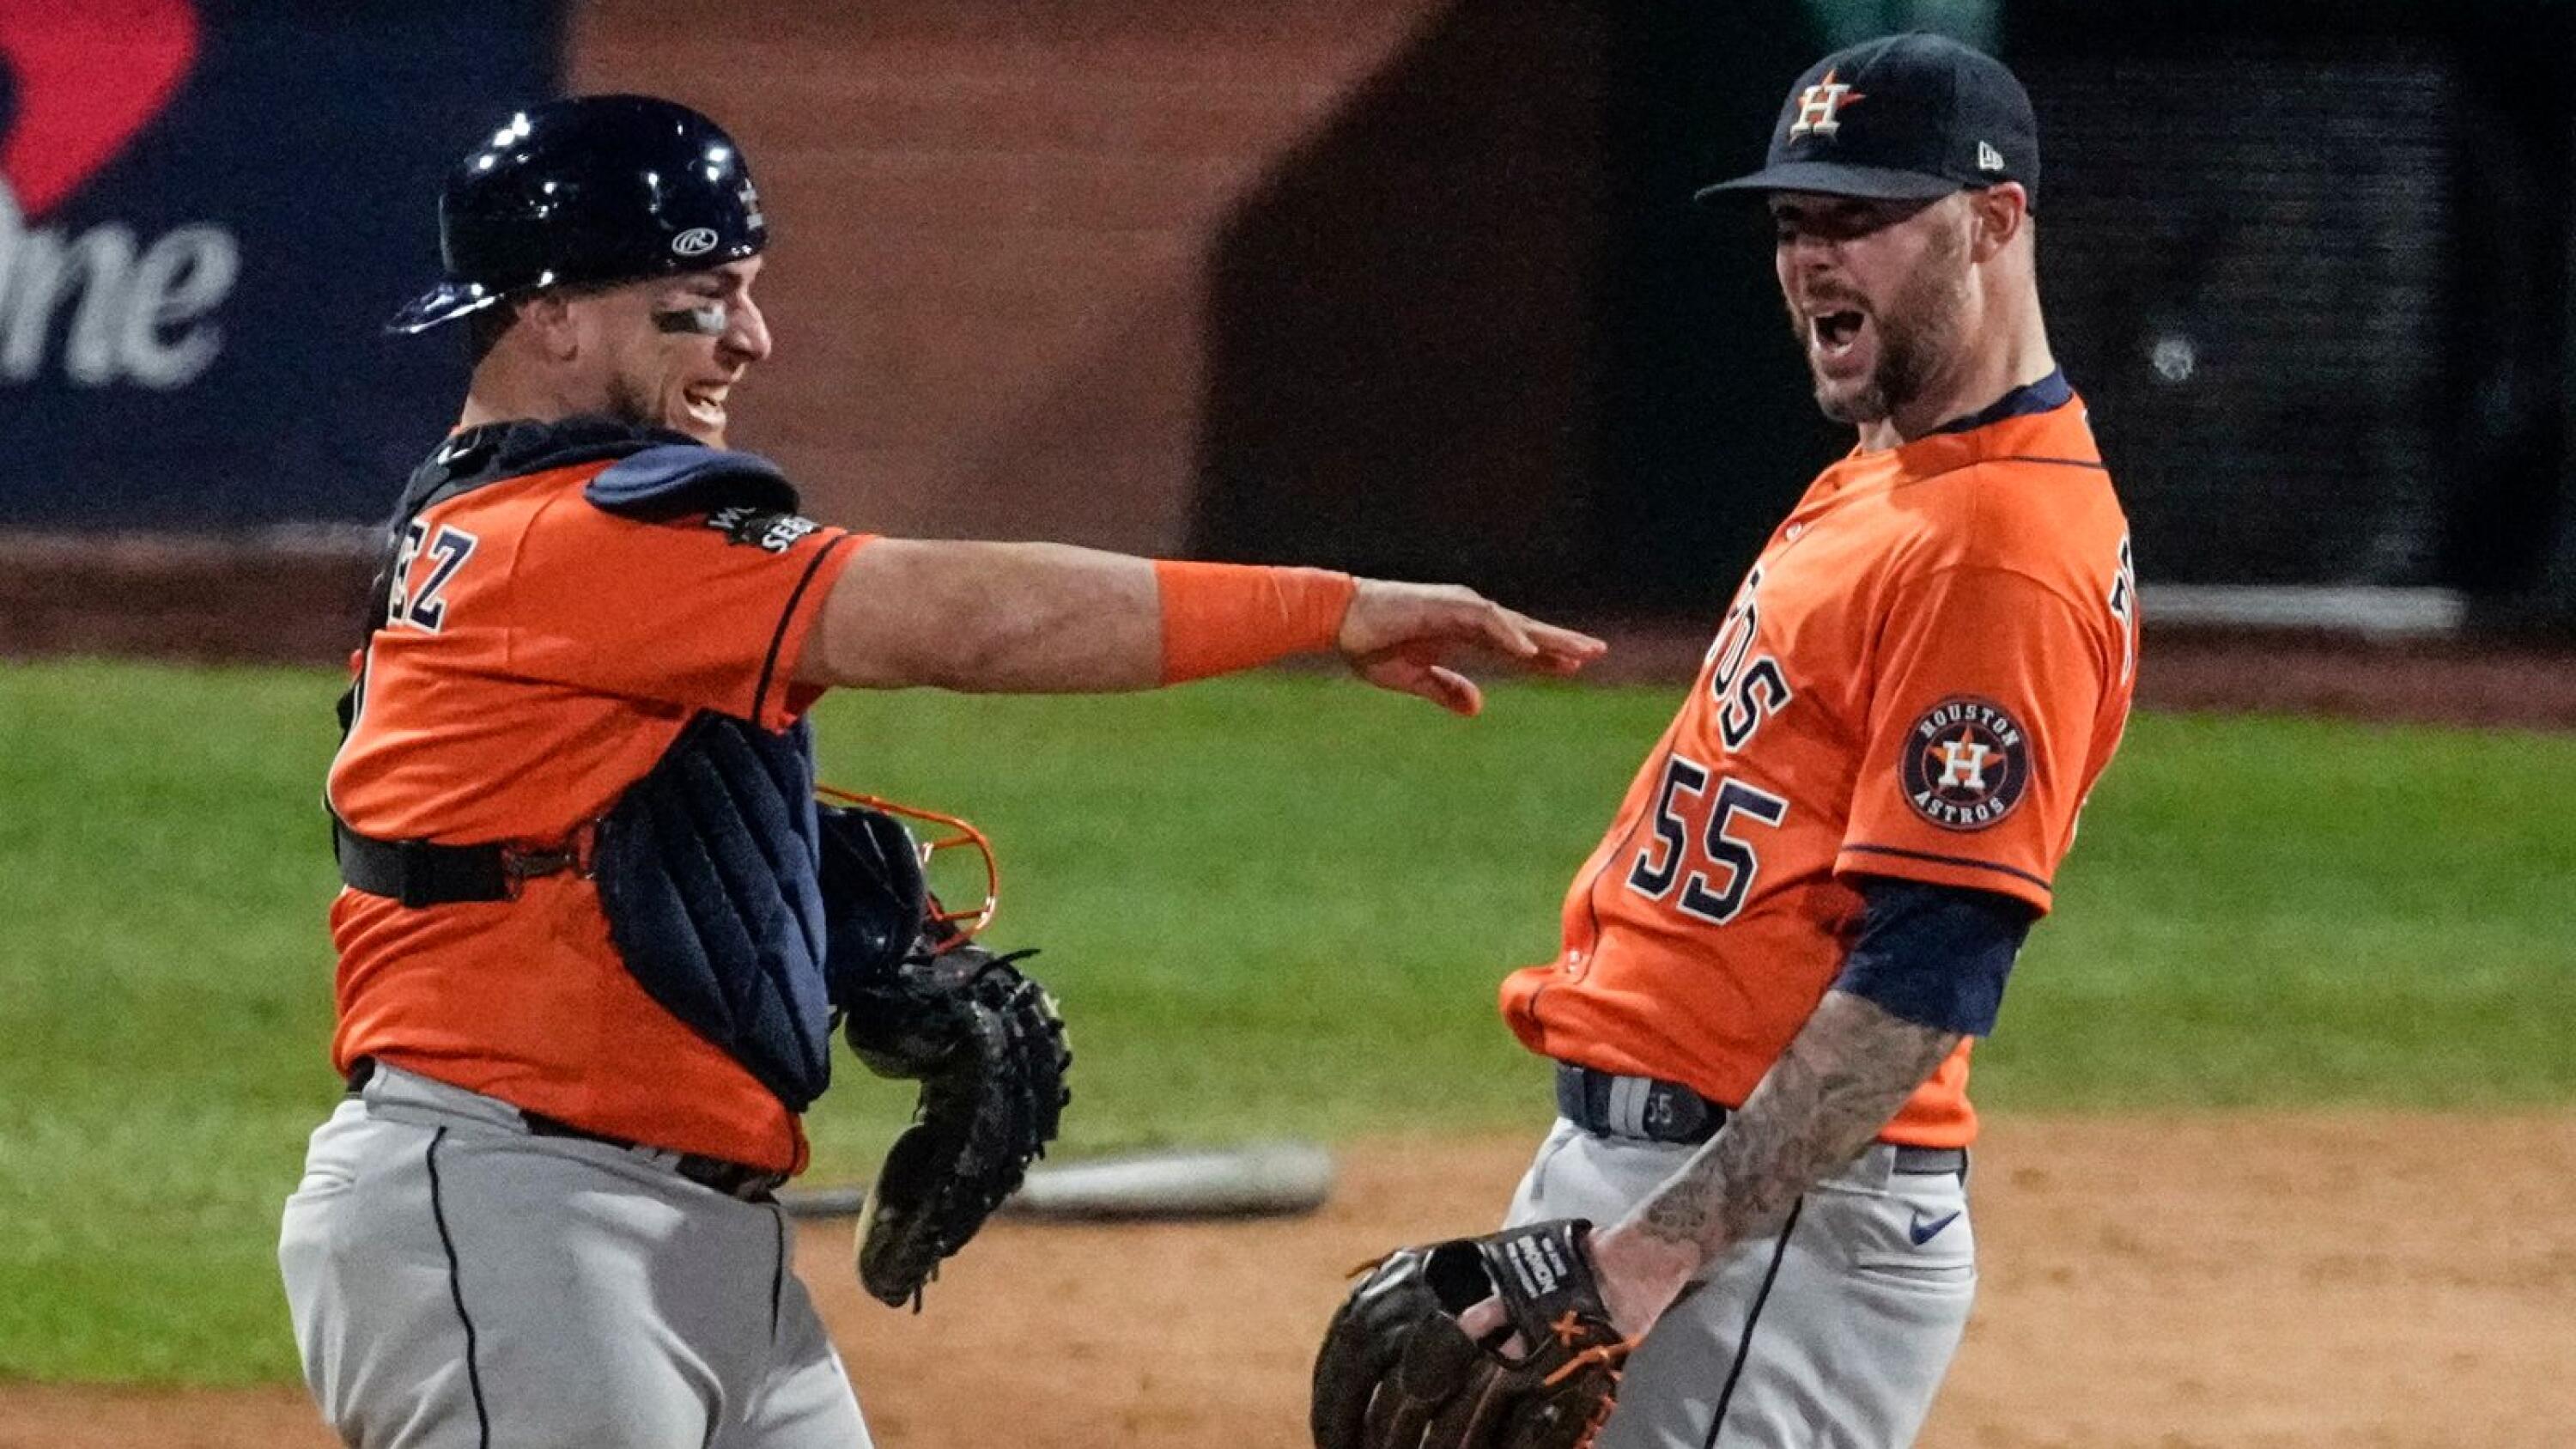 Astros throw first combined no-hitter in a World Series to beat